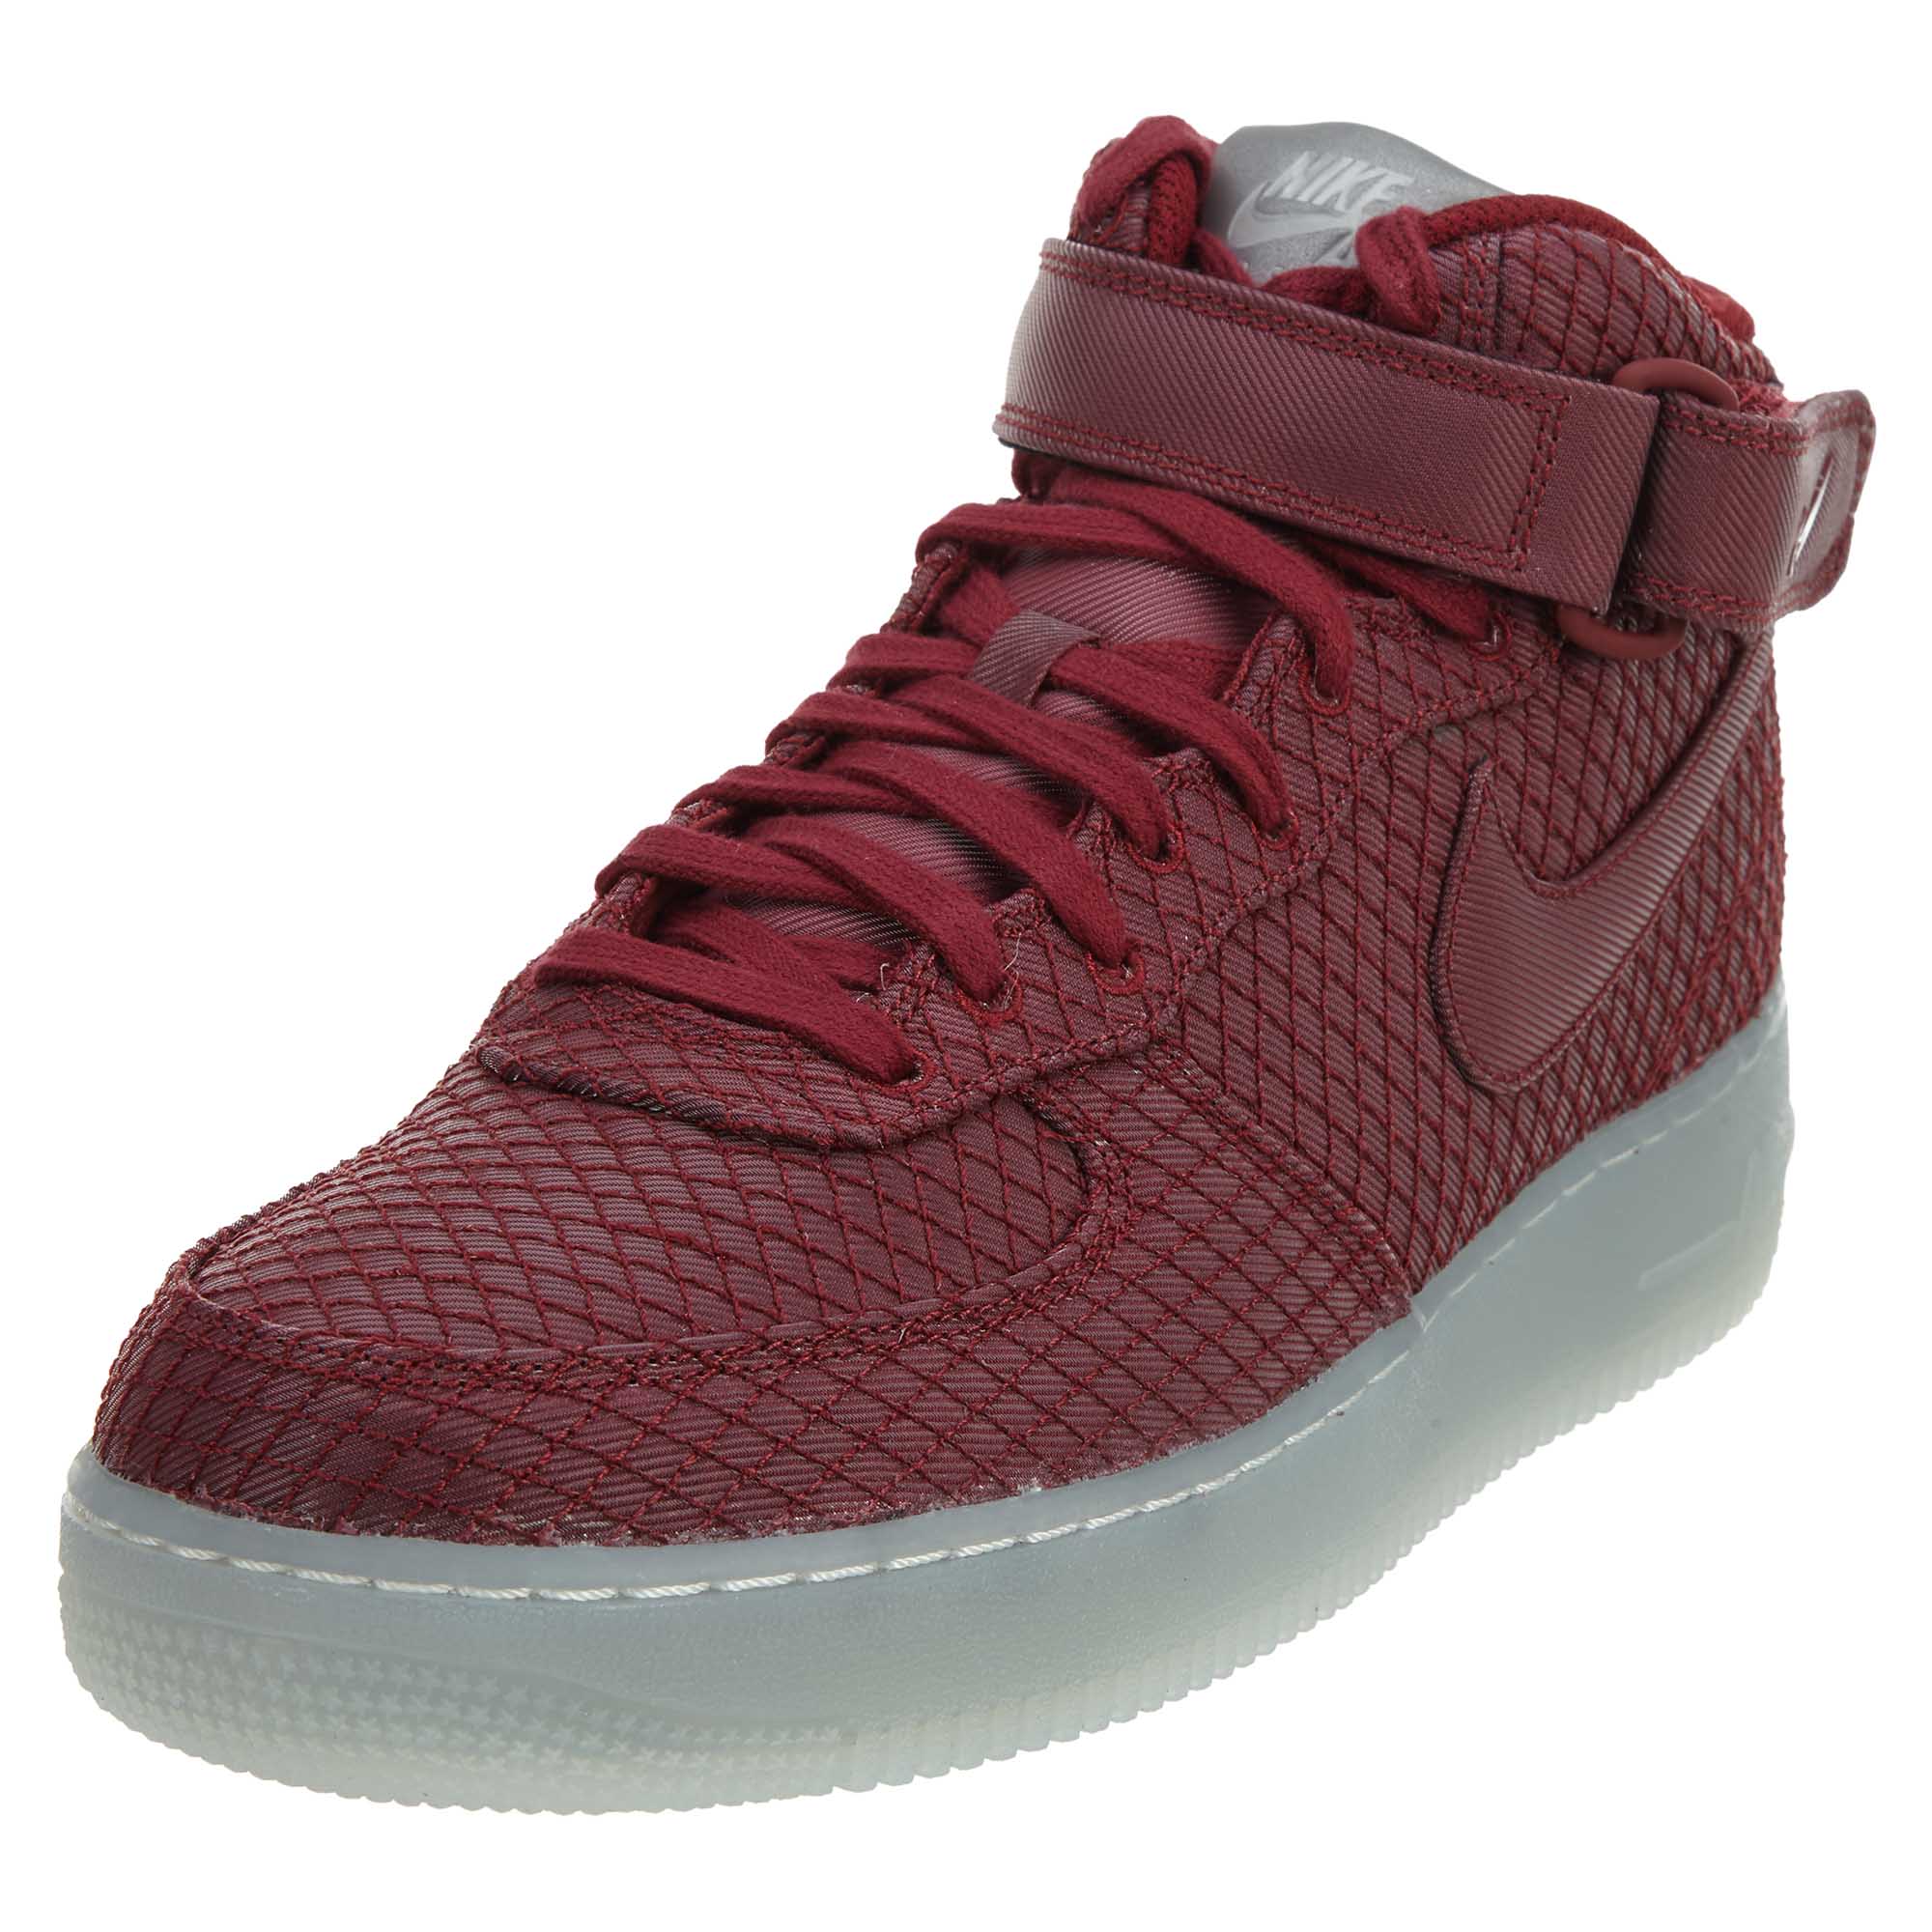 Nike Air Force 1 Mid 07 Team Red/Team Red/White